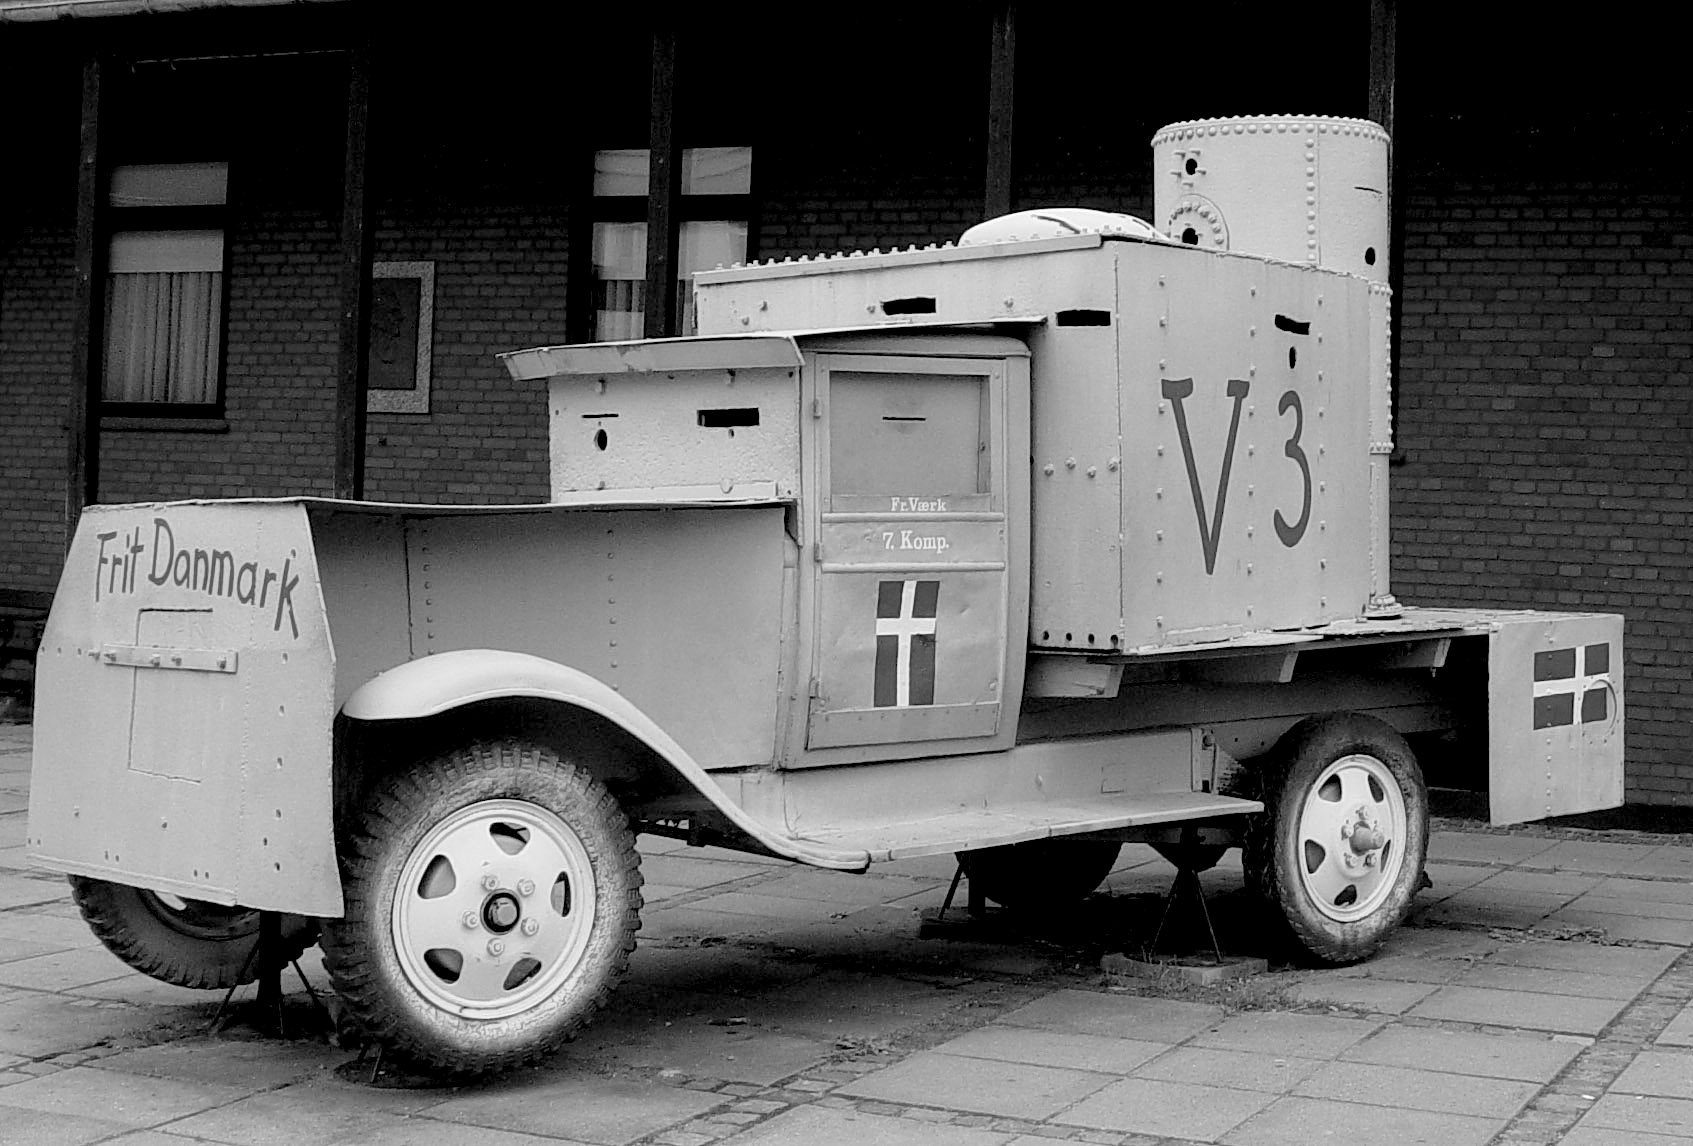 Vehicle built by railway shop workers for the Danish resistance movement